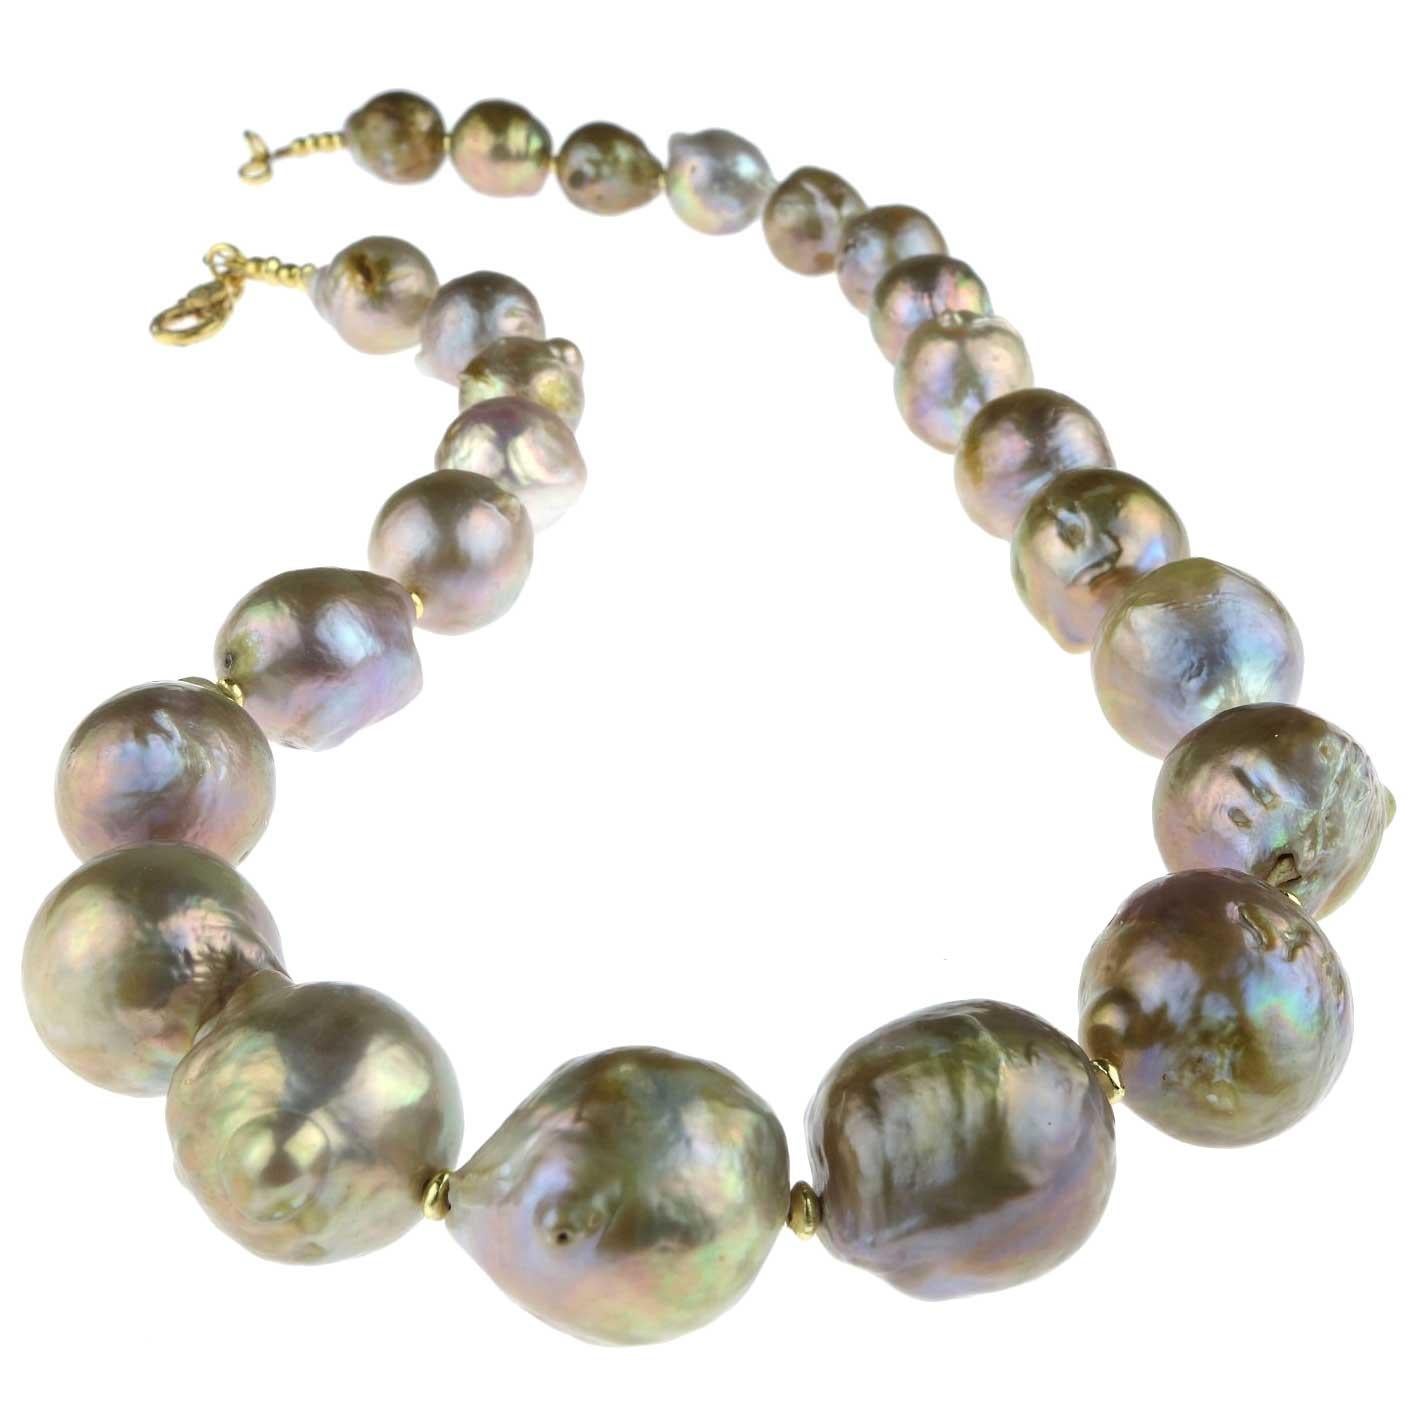 Glamorous Iridescent Wrinkle Pearl Necklace from Gemjunky